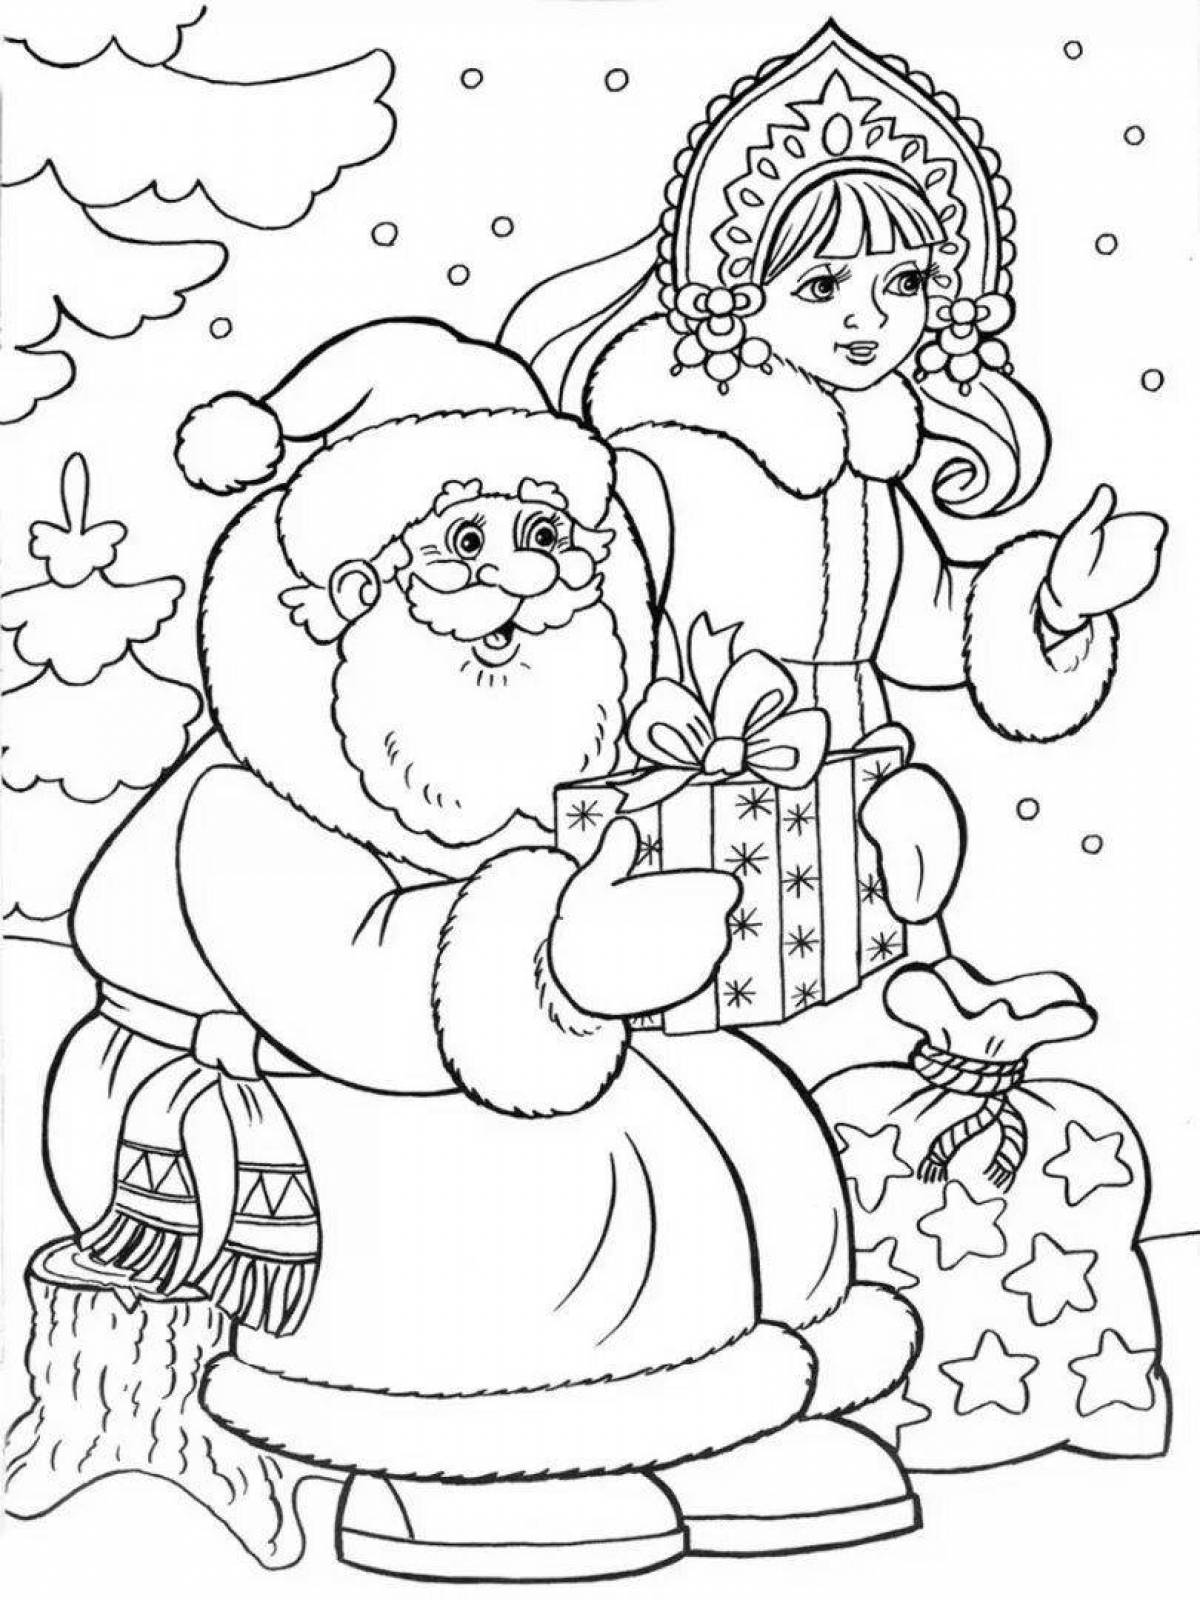 Coloring book of a violent snow maiden